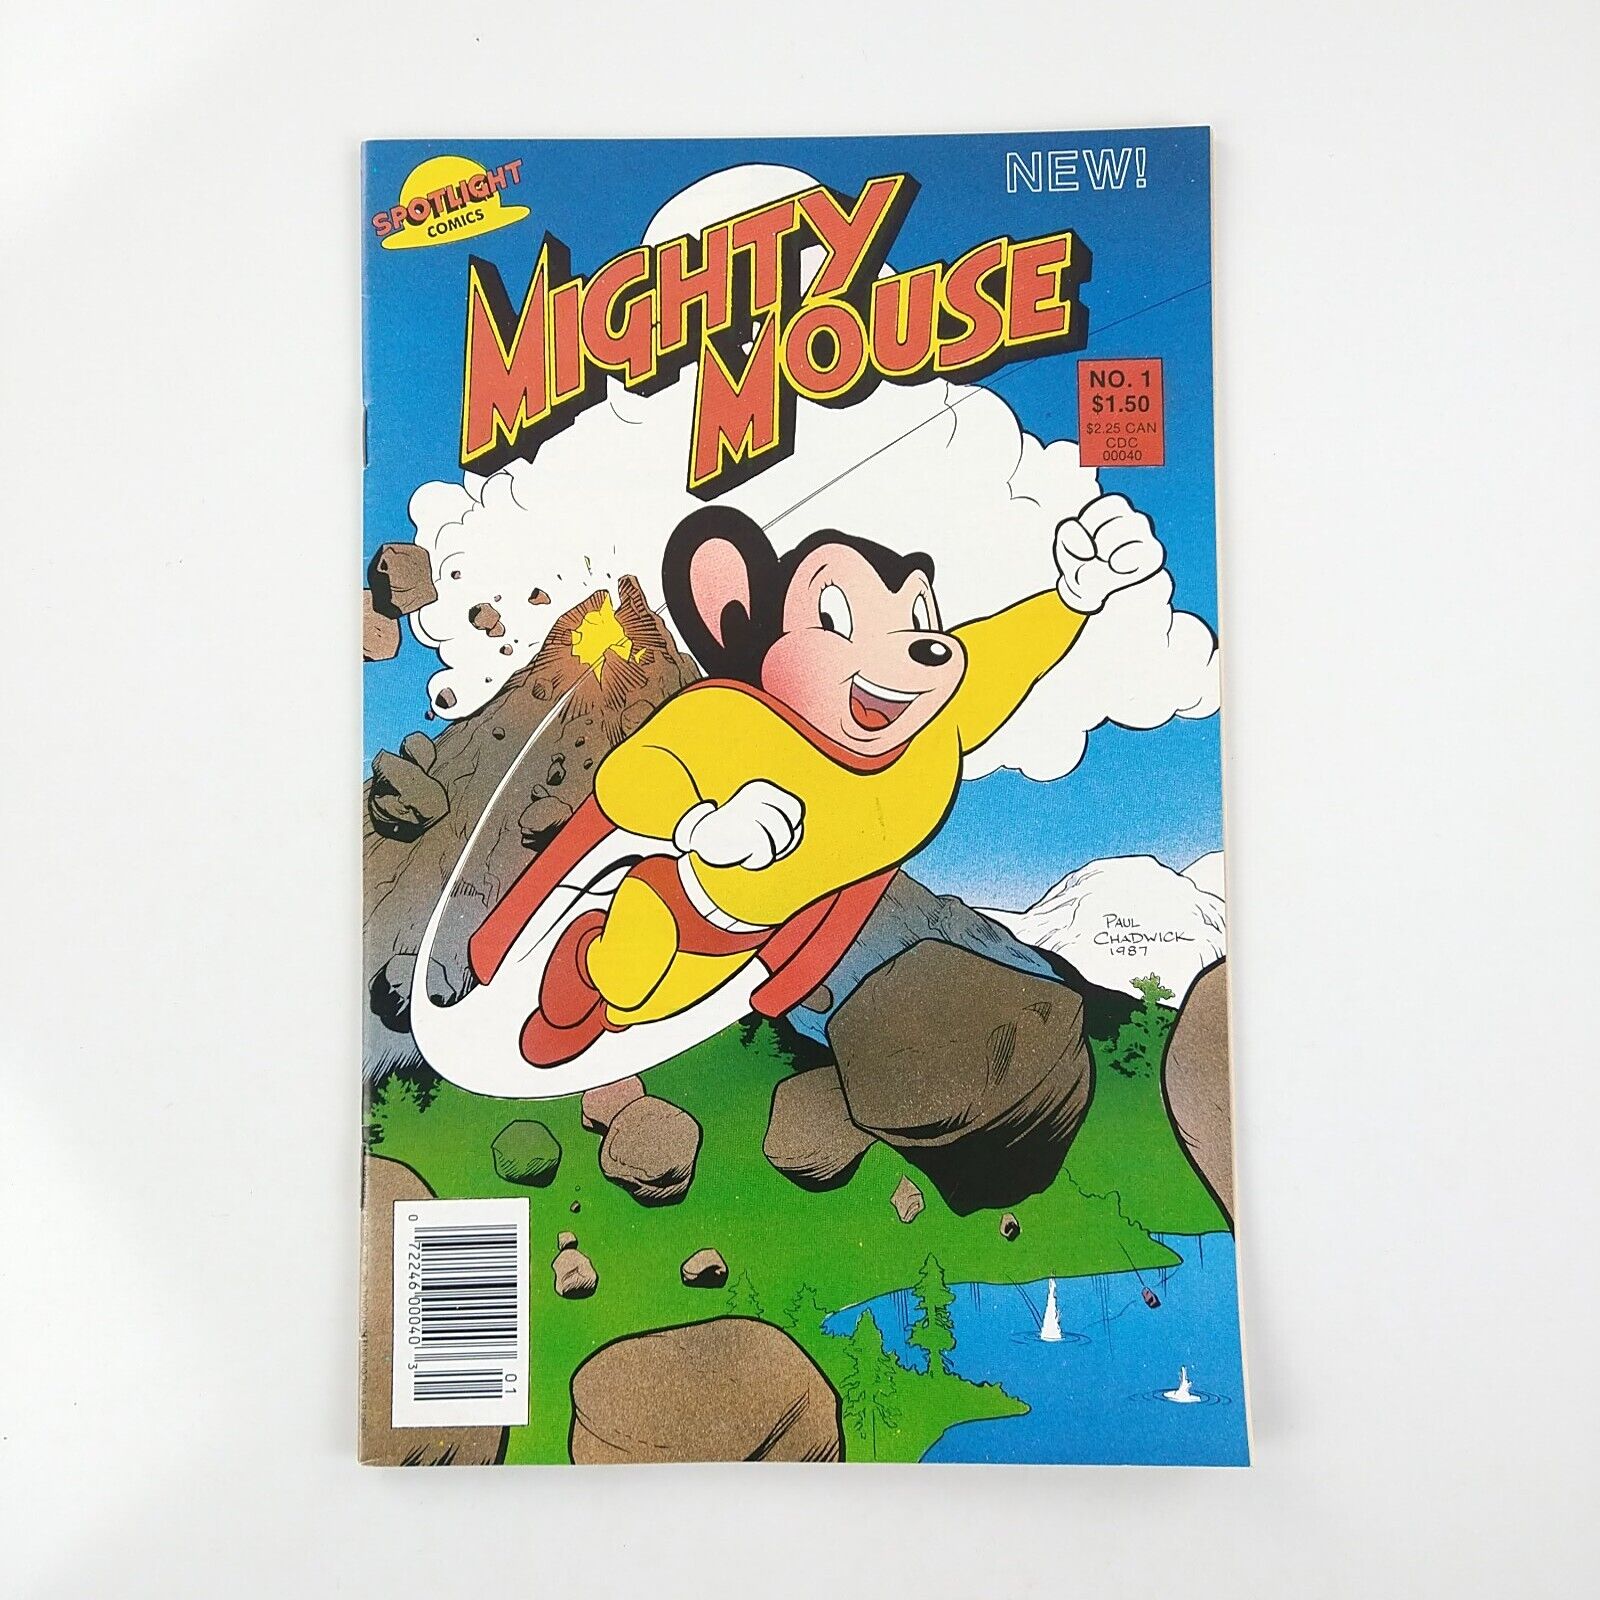 Mighty Mouse #1 Newsstand (1987 Spotlight Comics) VF